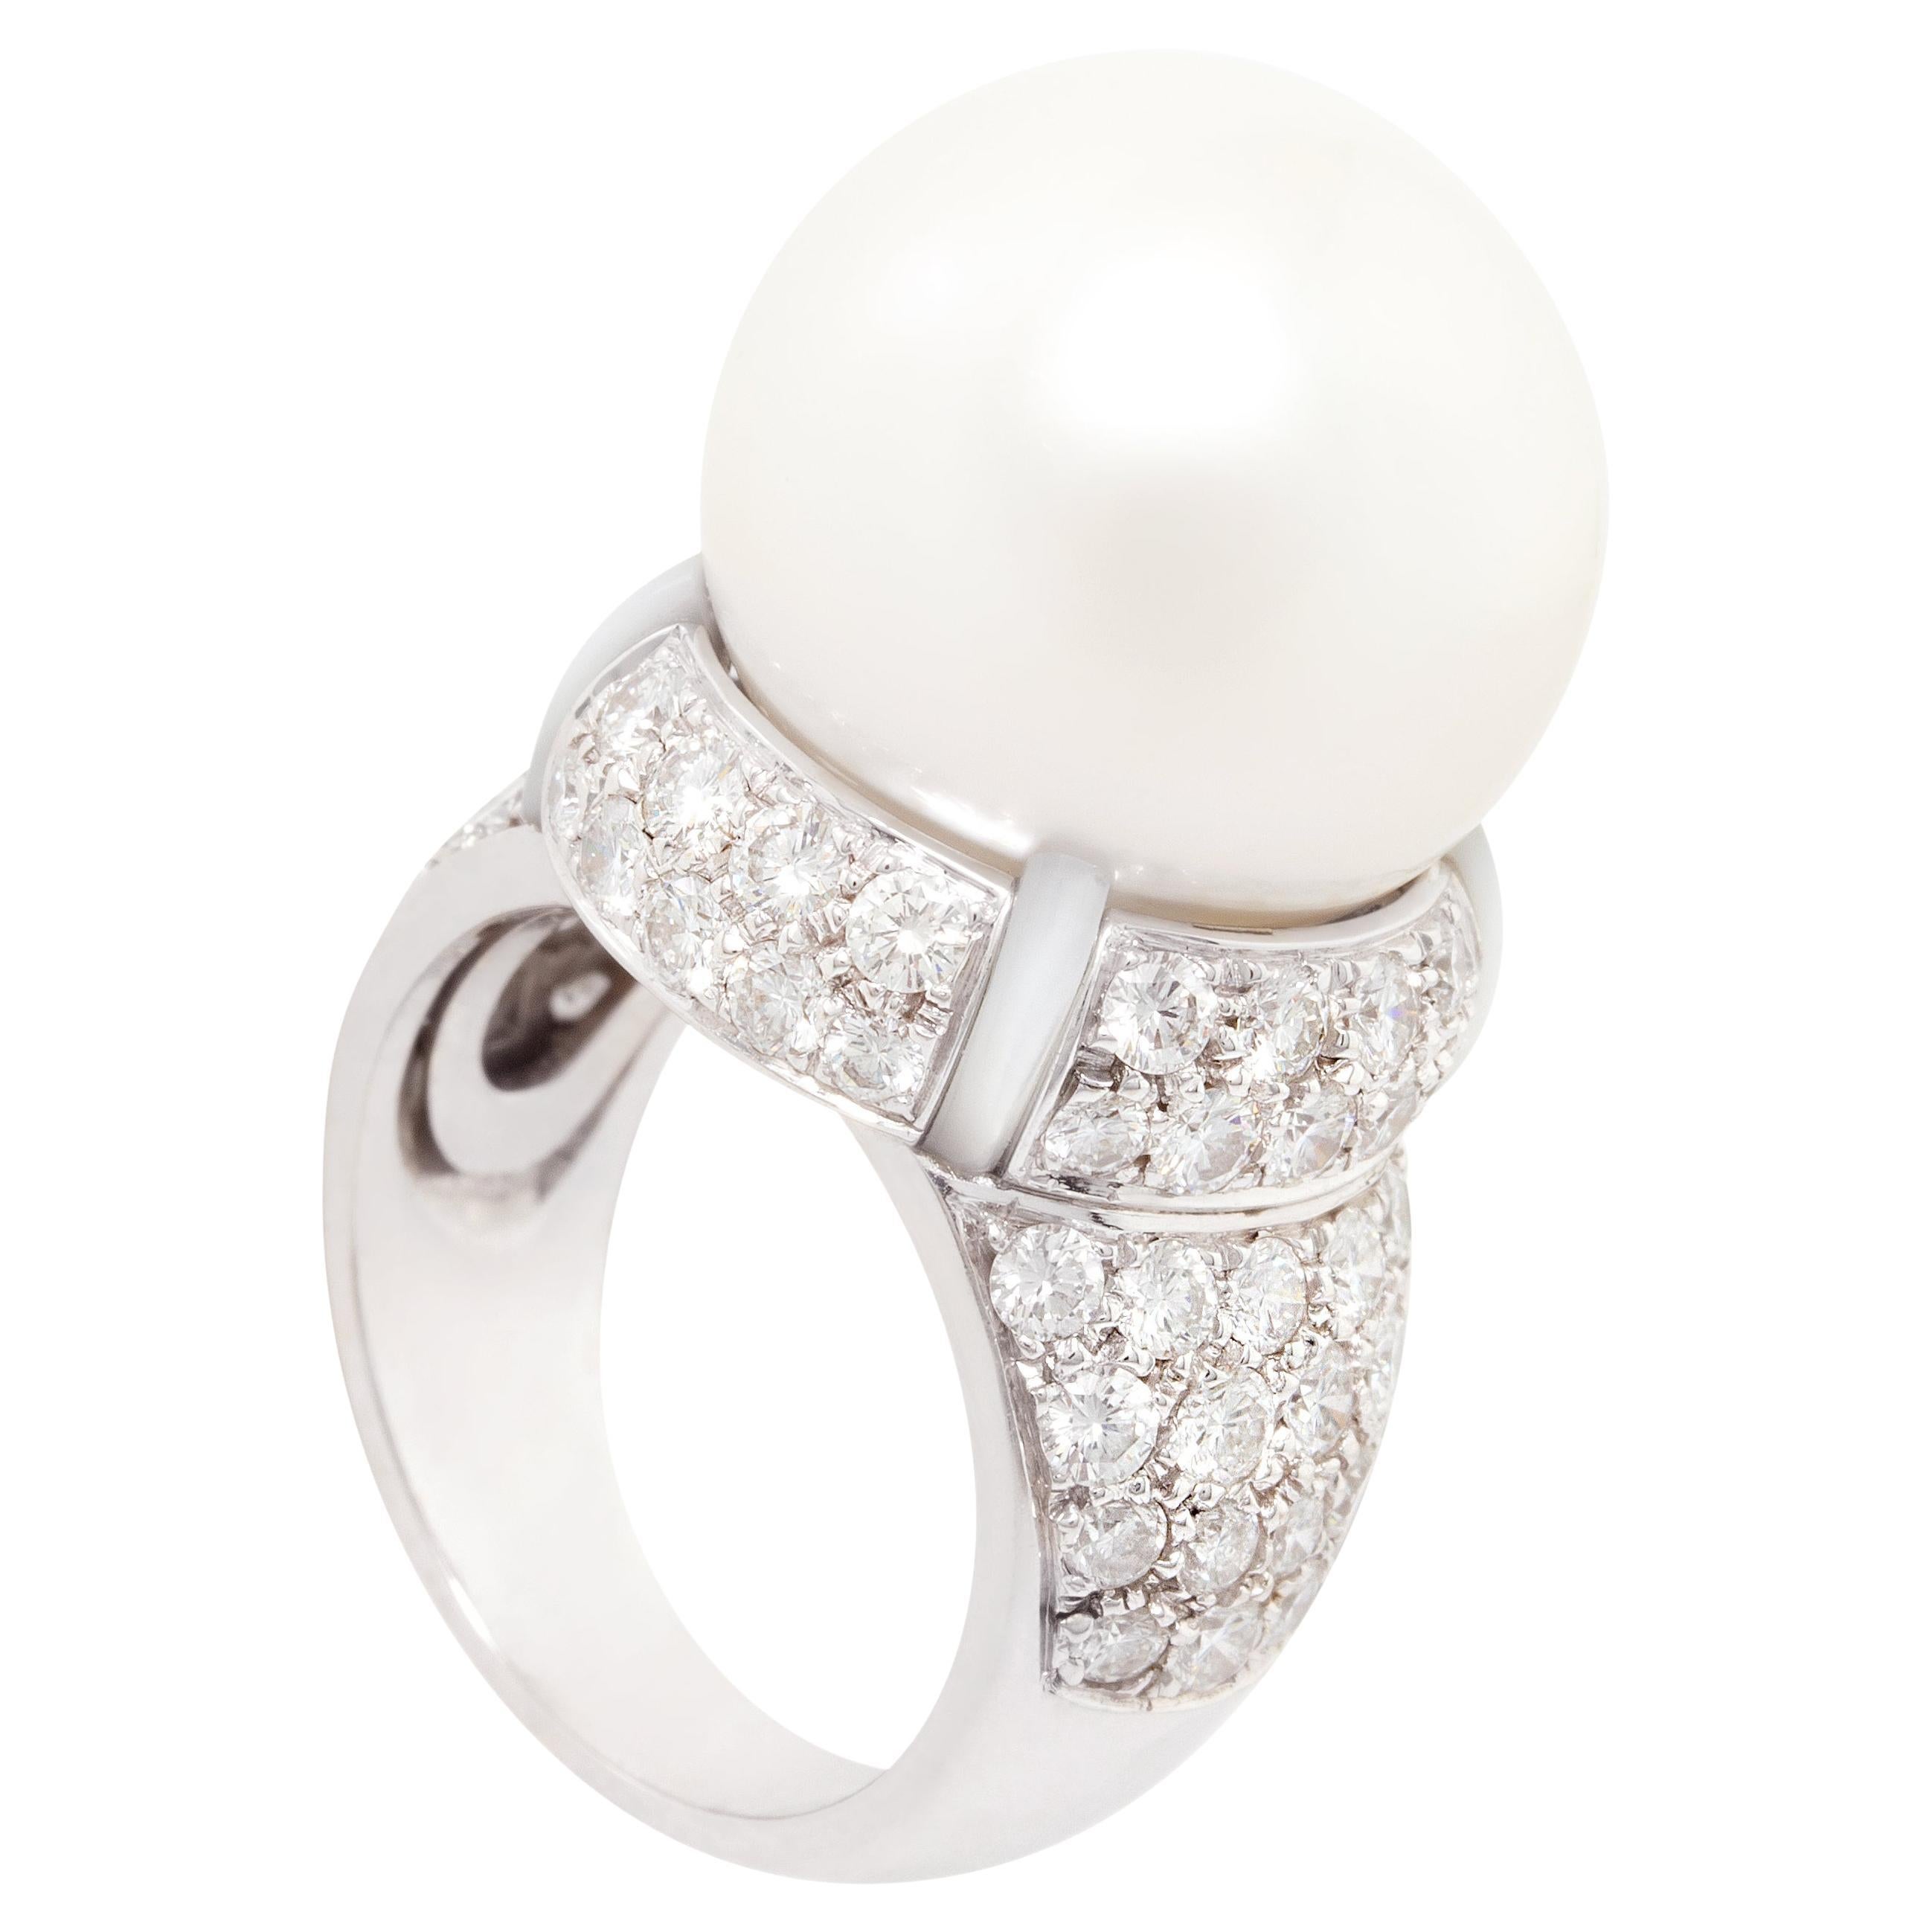 Ella Gafter Pearl Diamond Cocktail Ring For Sale